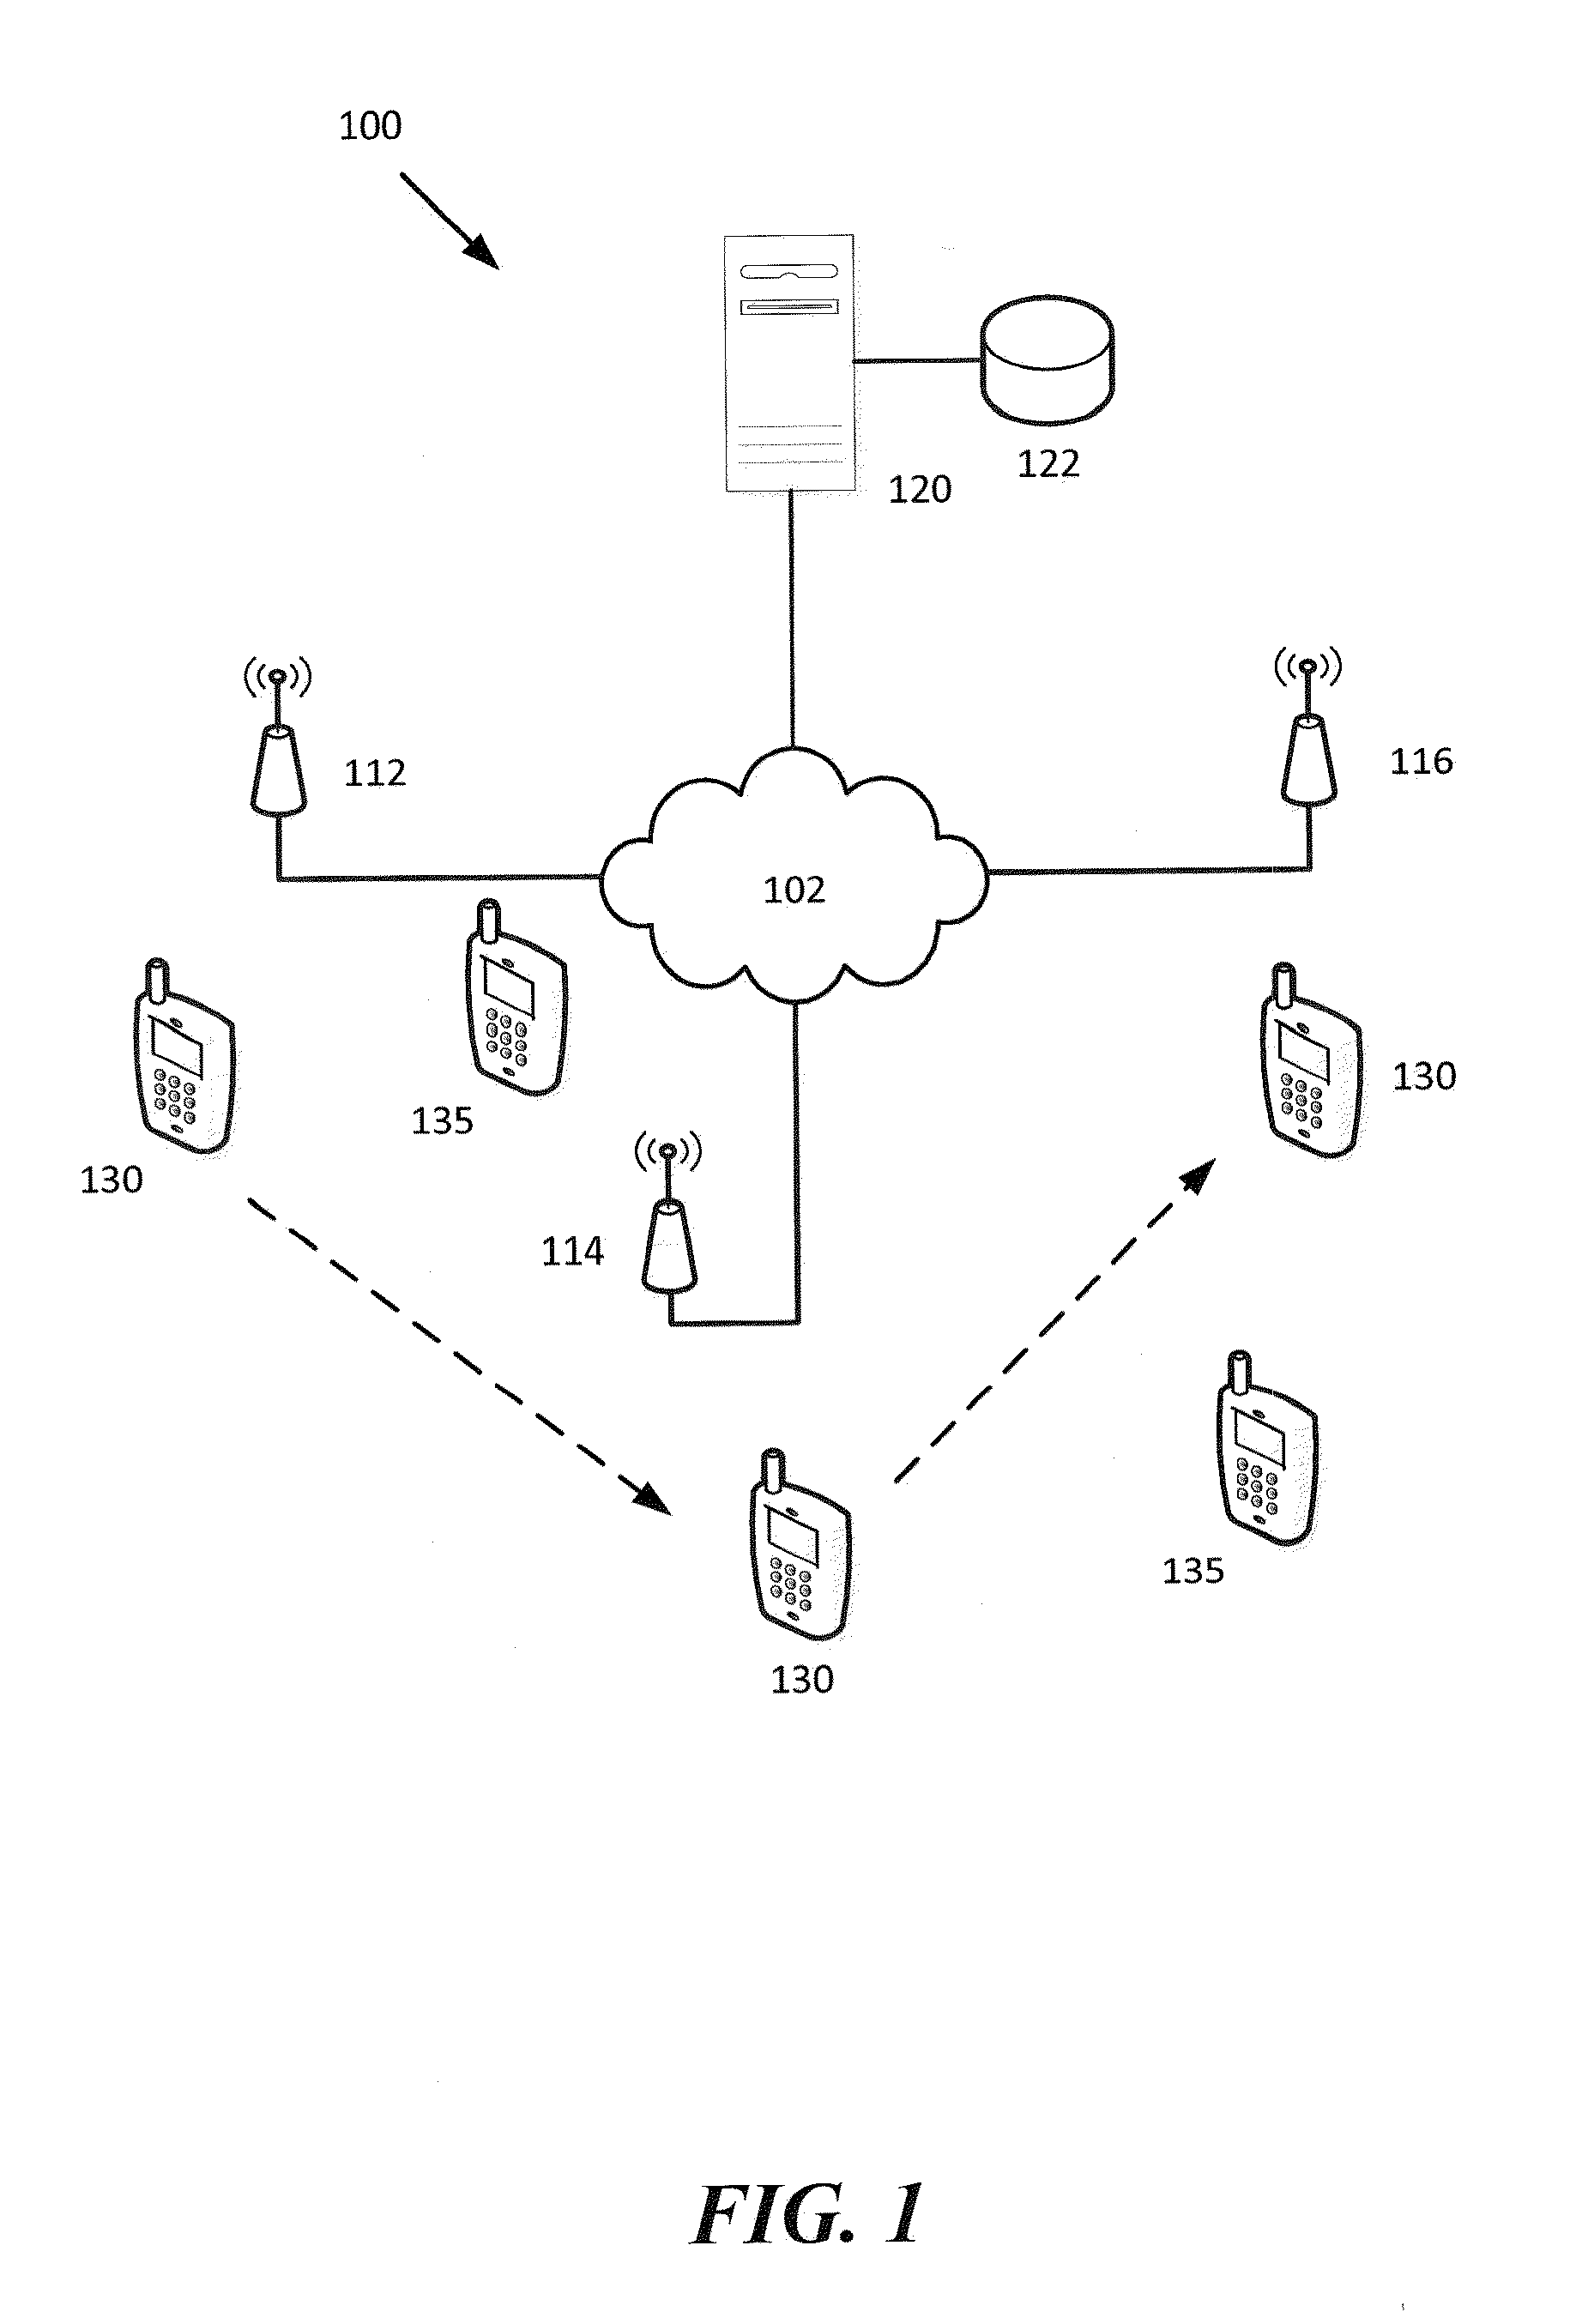 Method and System for Selecting a Wireless Network for Offloading